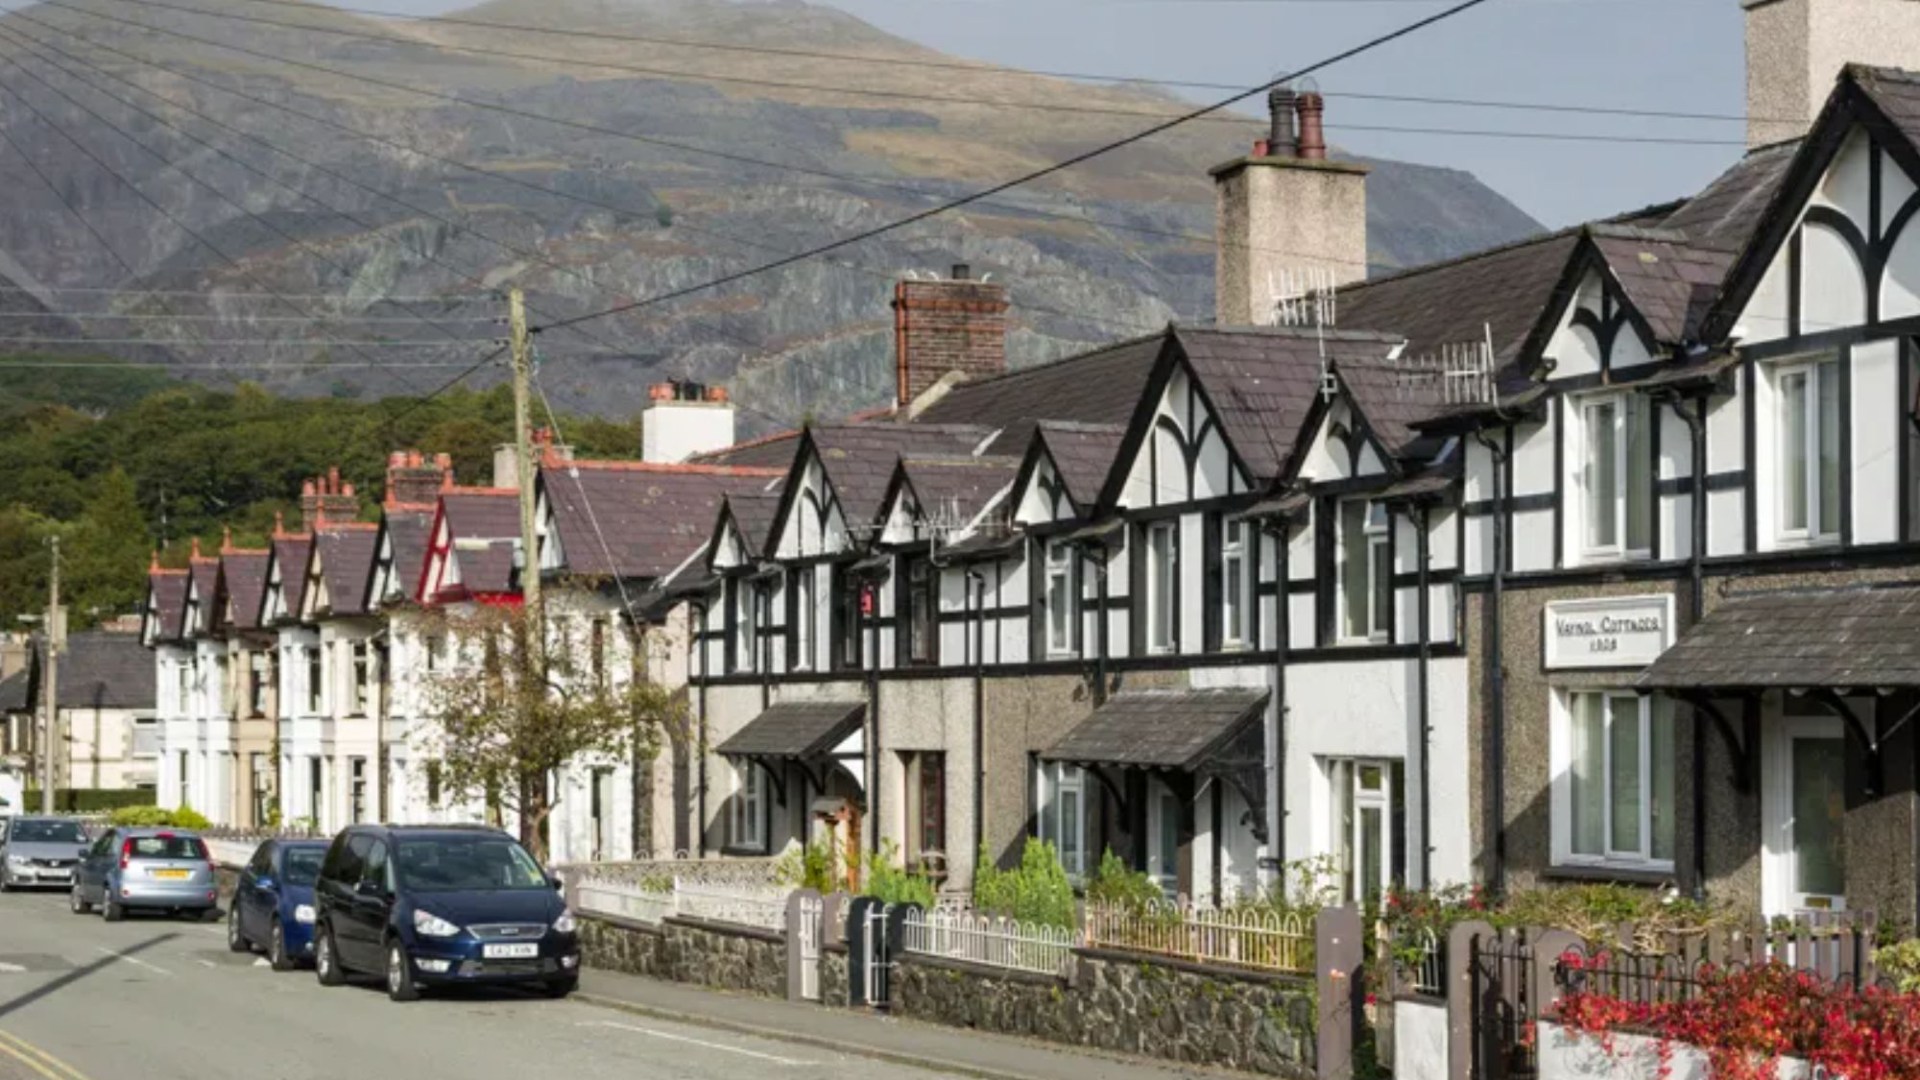 Our quiet village has been turned into the ‘Magaluf of North Wales’ – tourists are killing our hometown